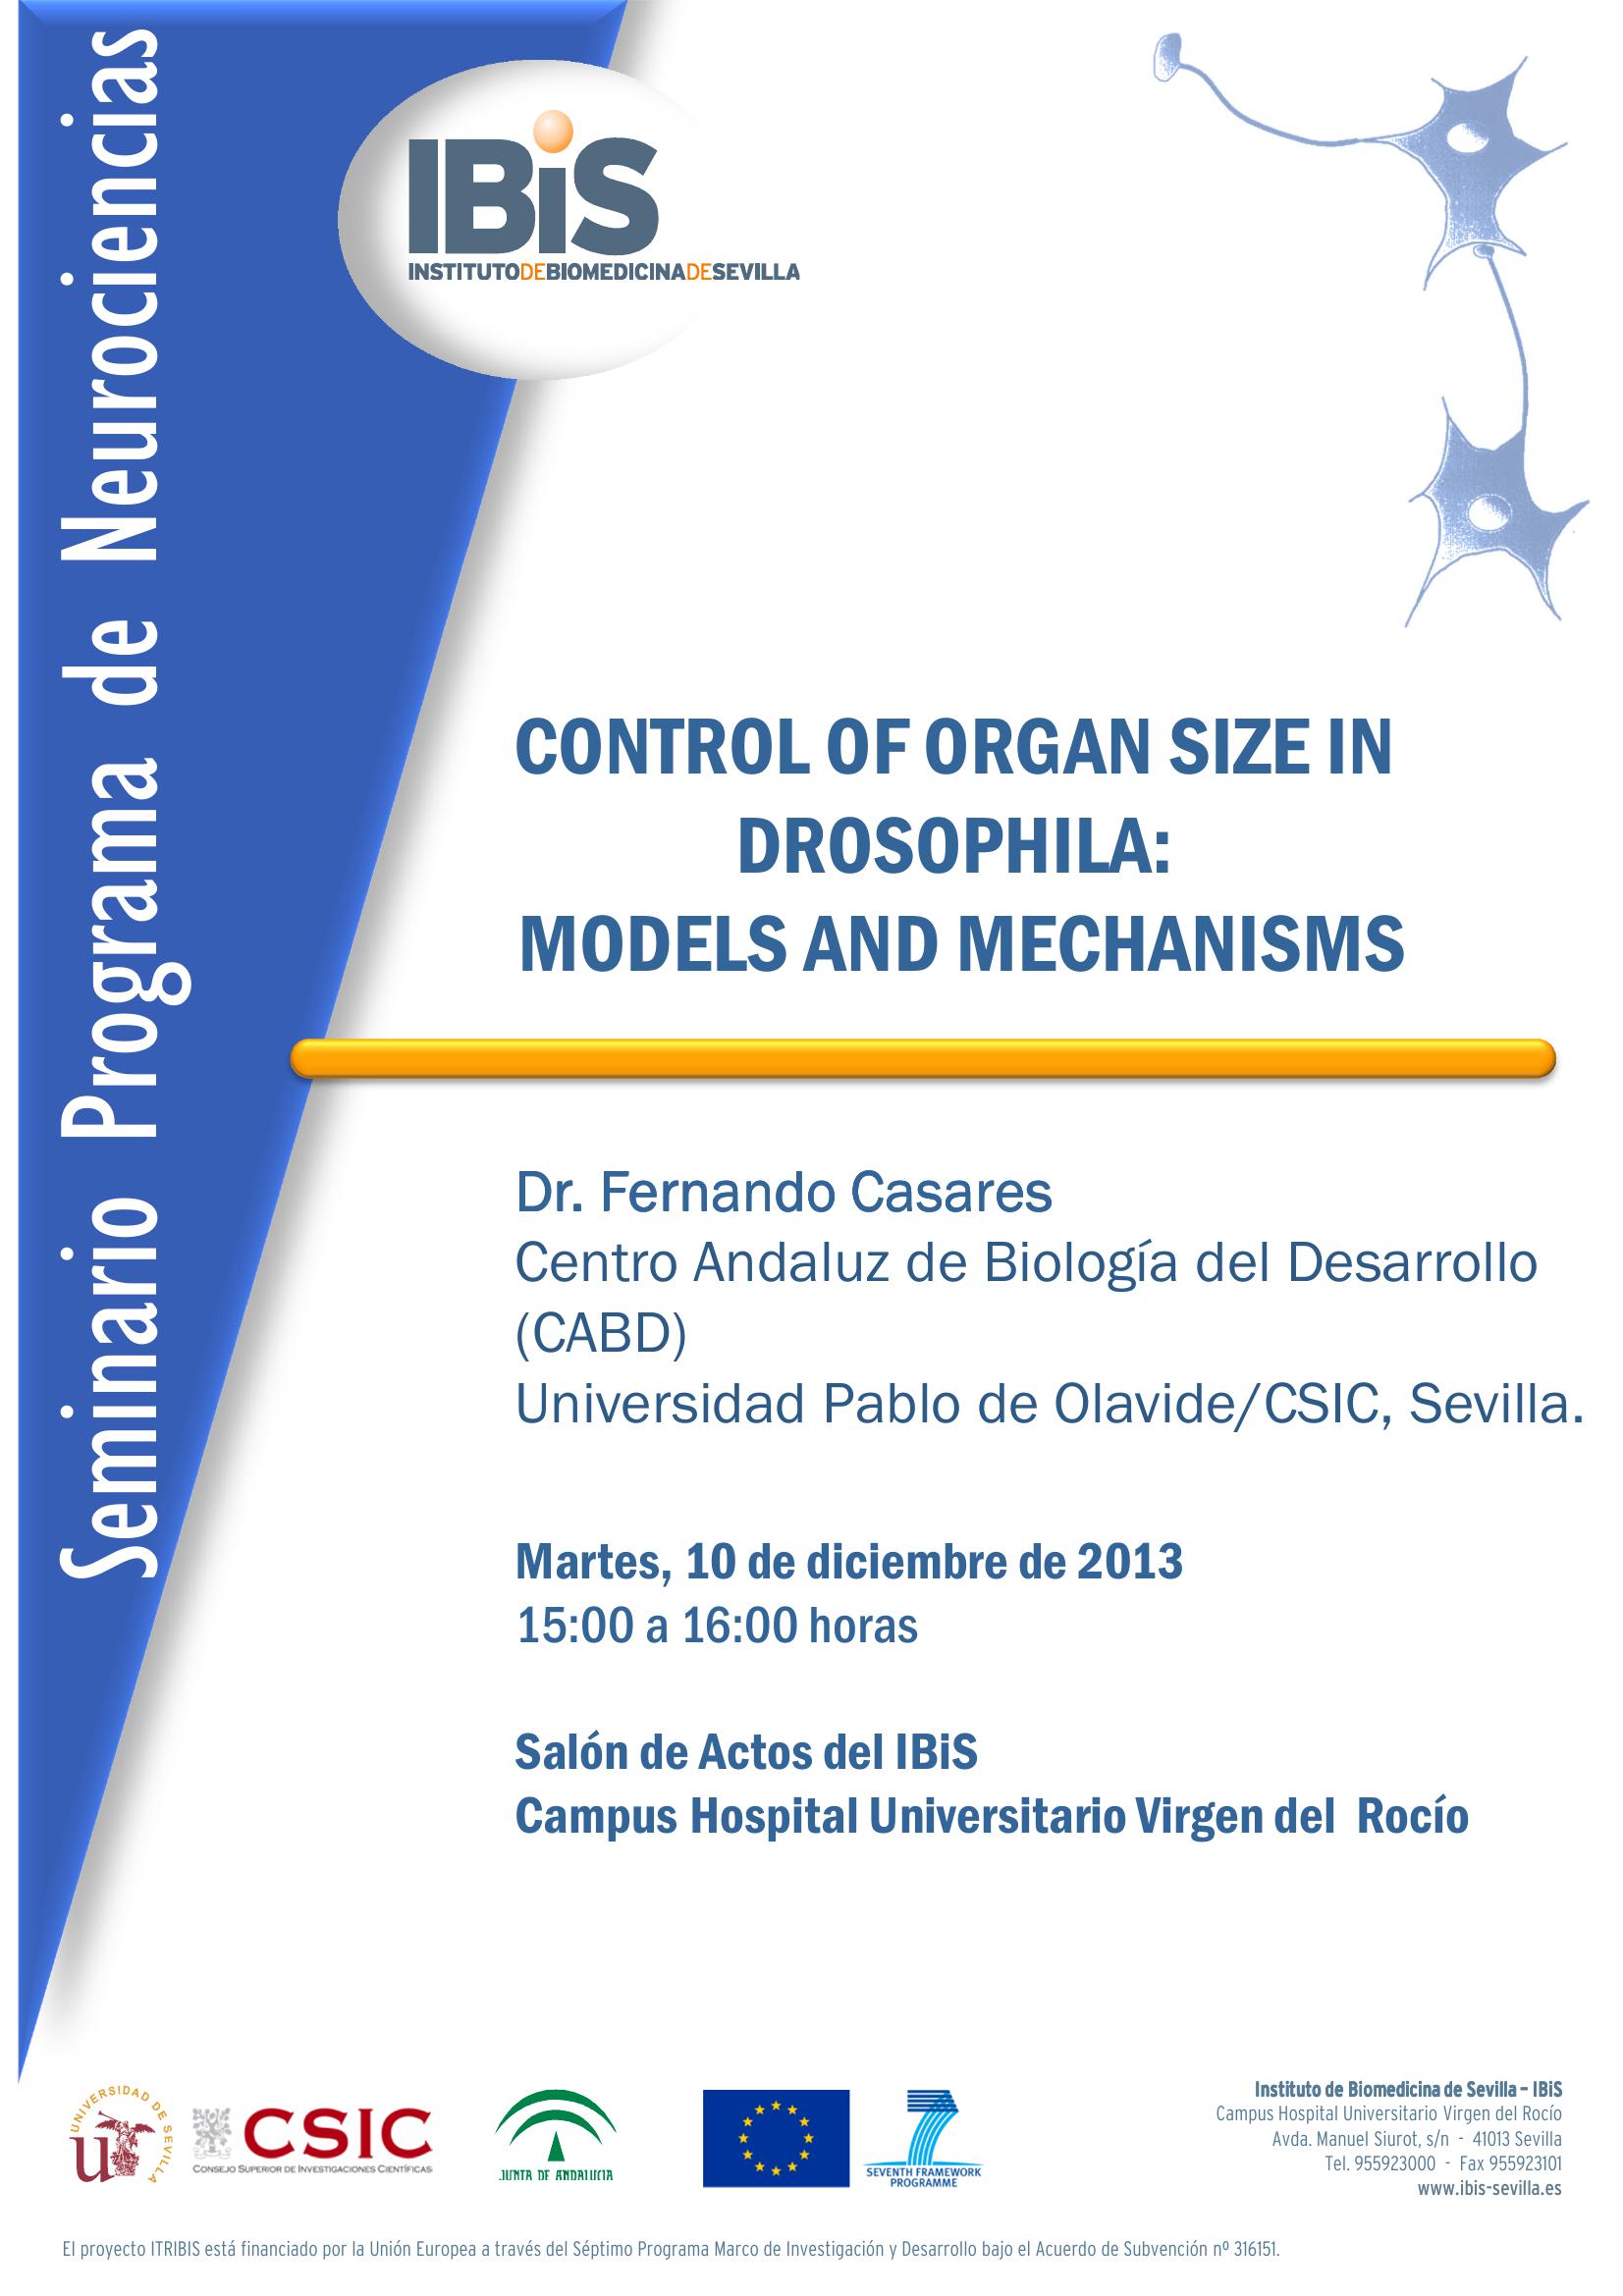 Poster: CONTROL OF ORGAN SIZE IN DROSOPHILA: MODELS AND MECHANISMS